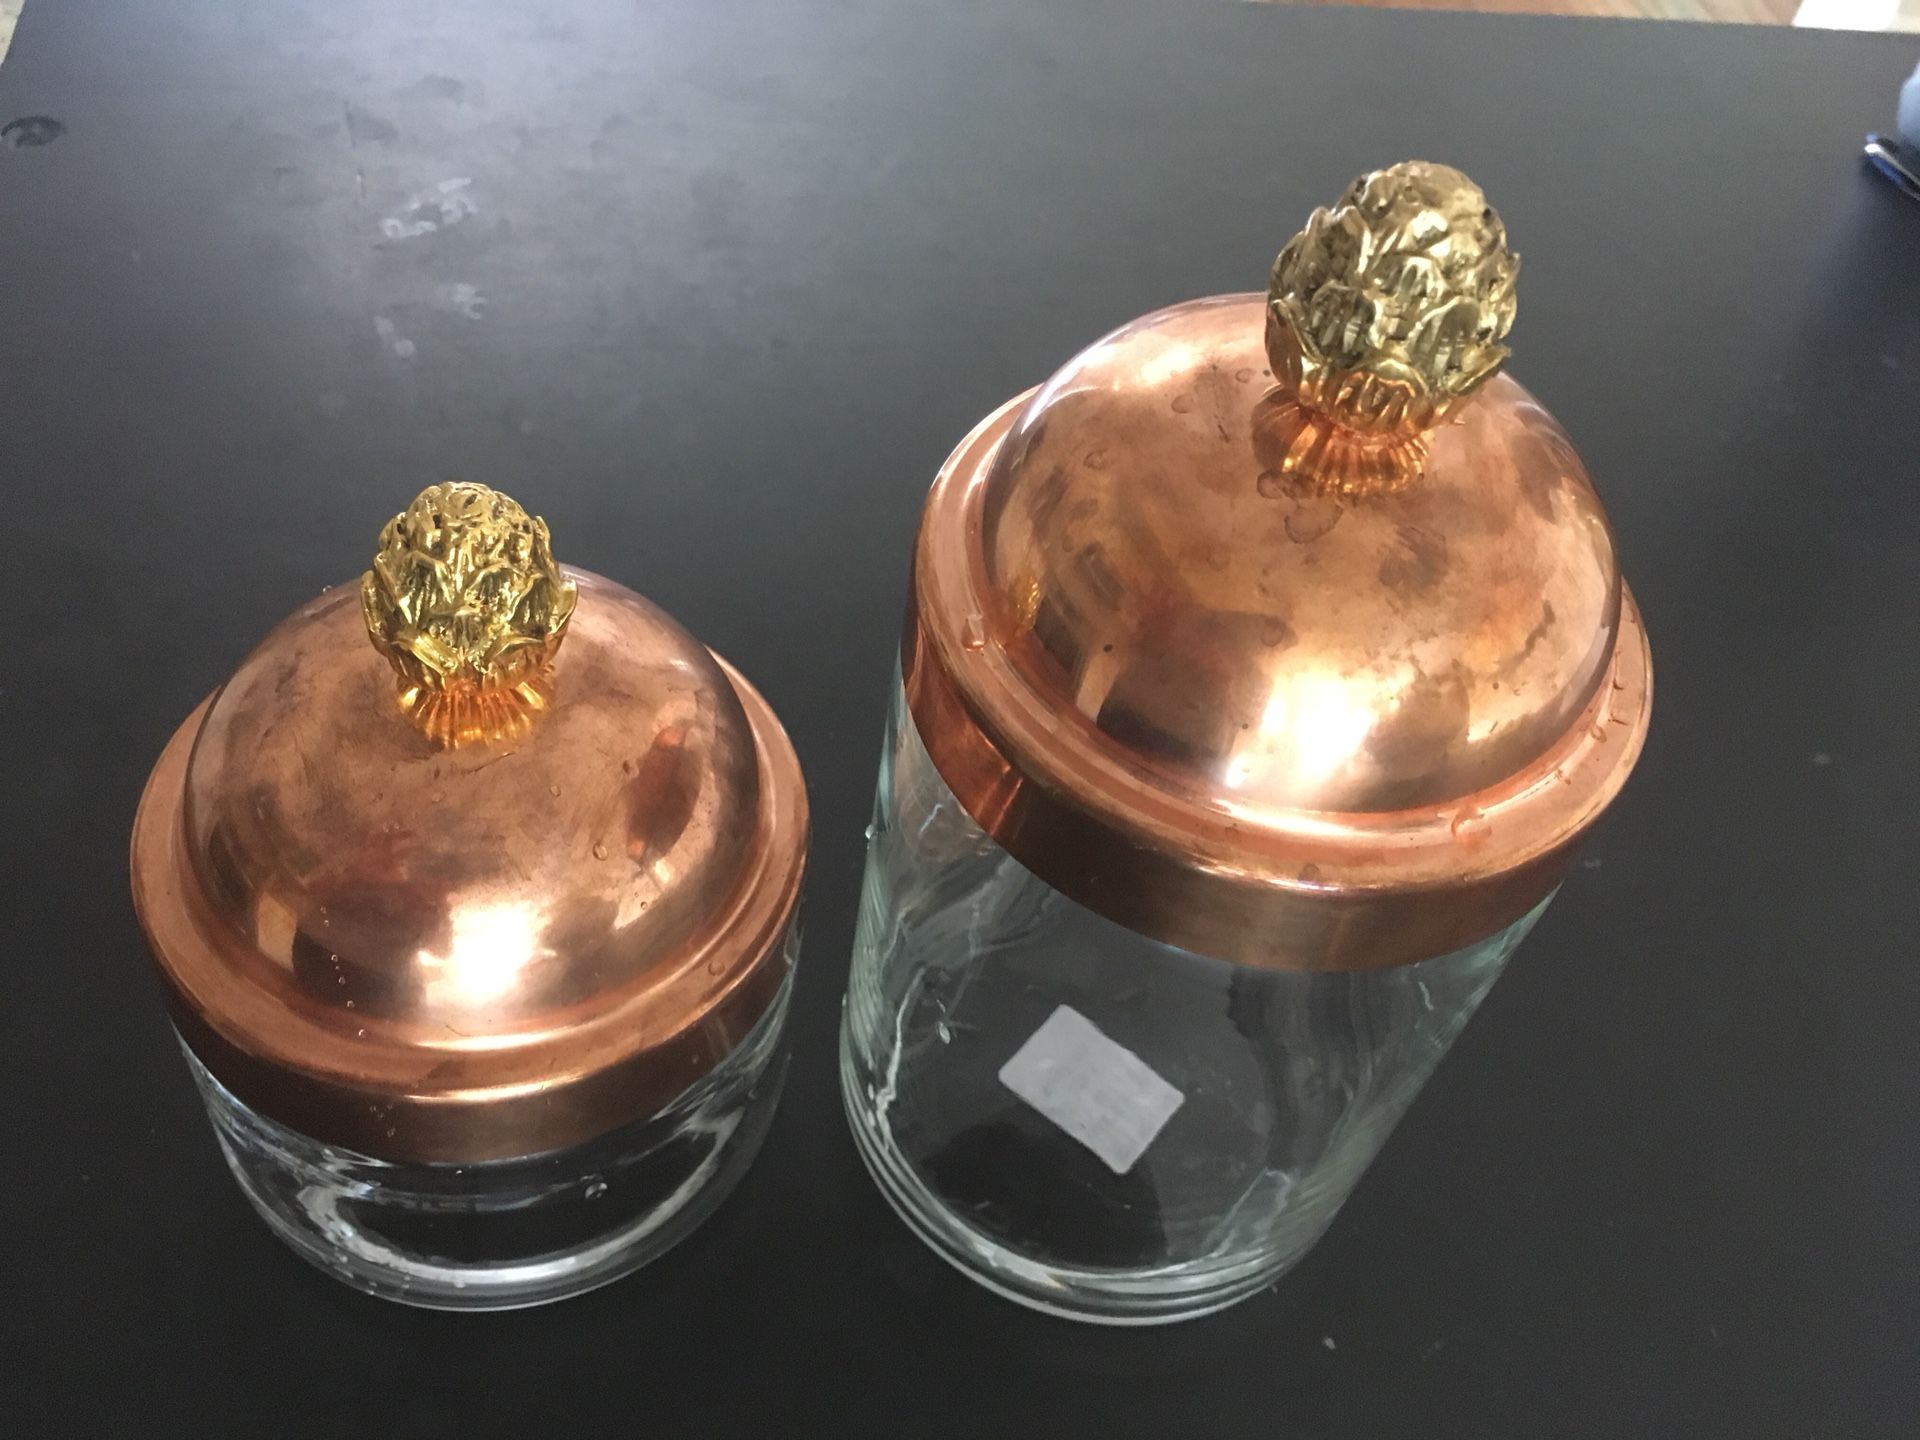 Ruffoni MADE IN ITALY Set of 2 Copper Artichoke Finial Lid Canister Jars glass storage